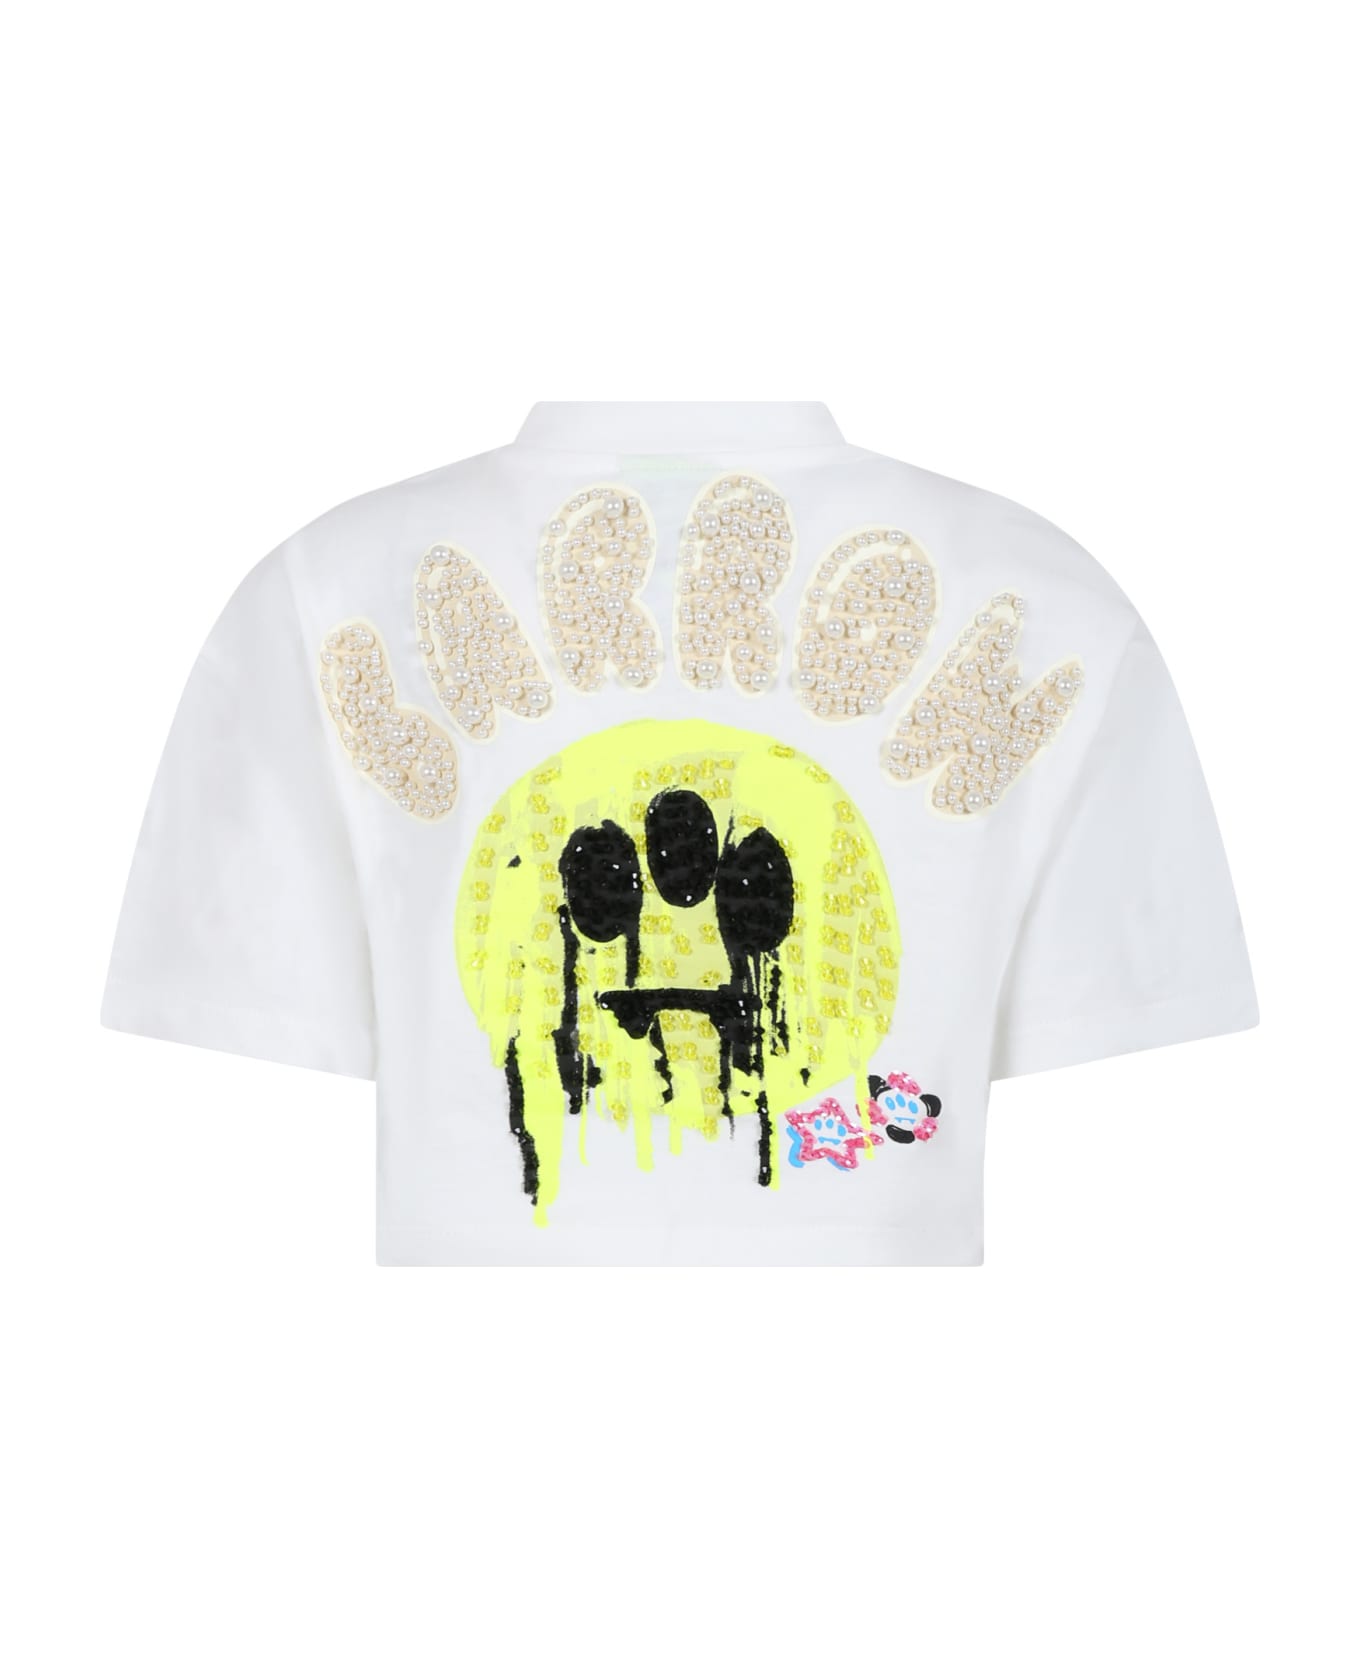 Barrow White T-shirt For Girl With Smiley Face - Off white